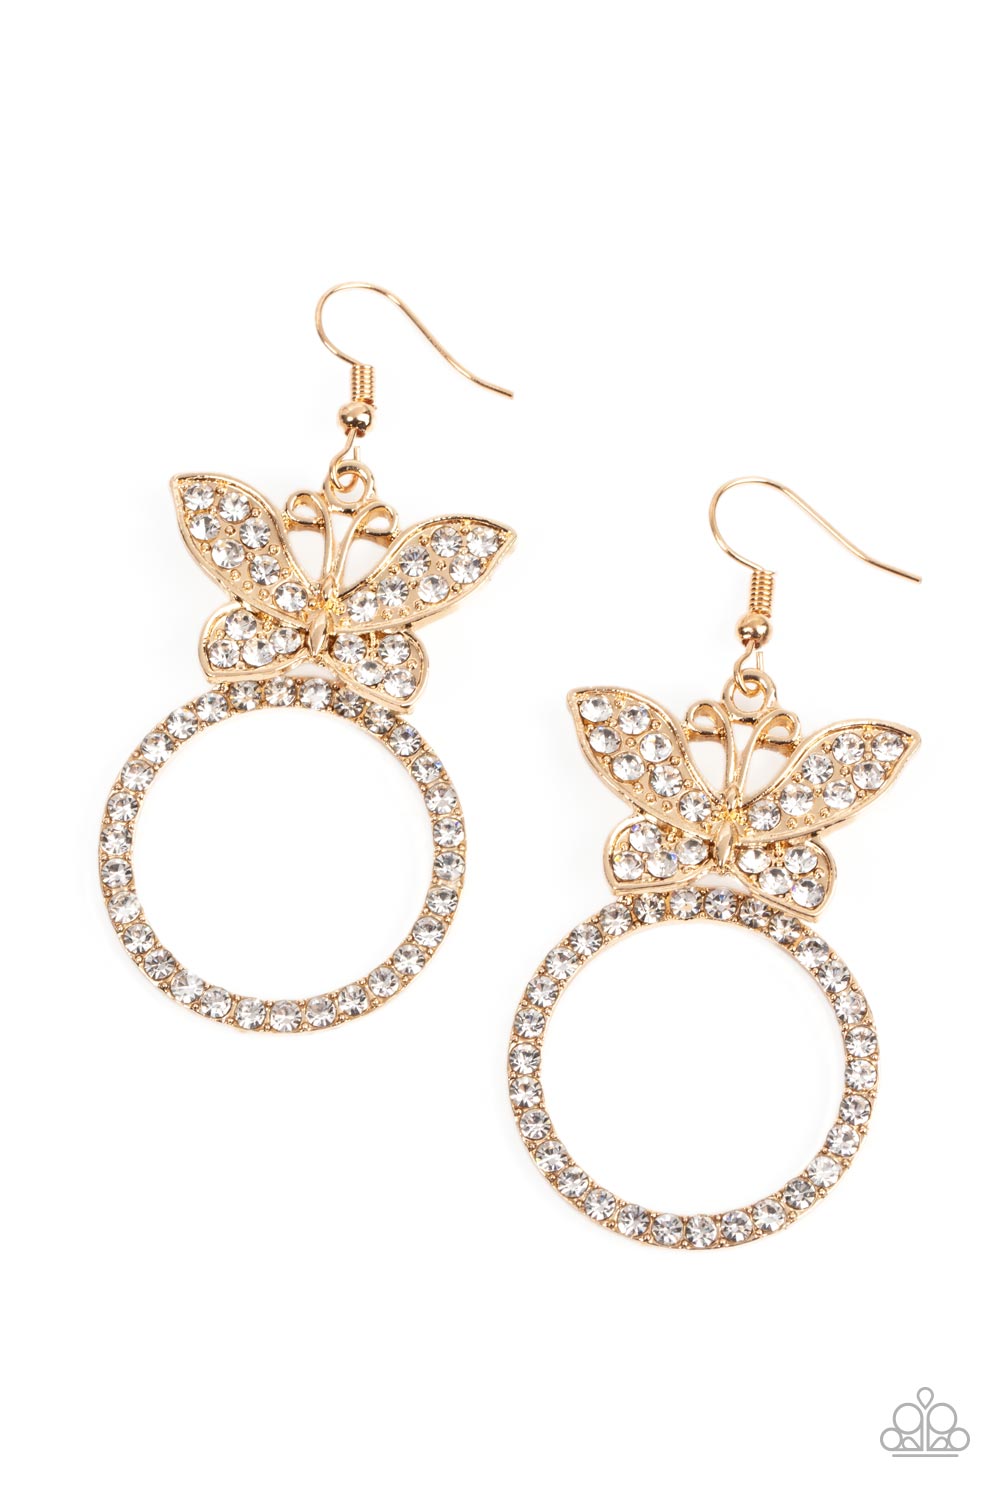 Paradise Found - Gold Butterfly Earrings - Princess Glam Shop